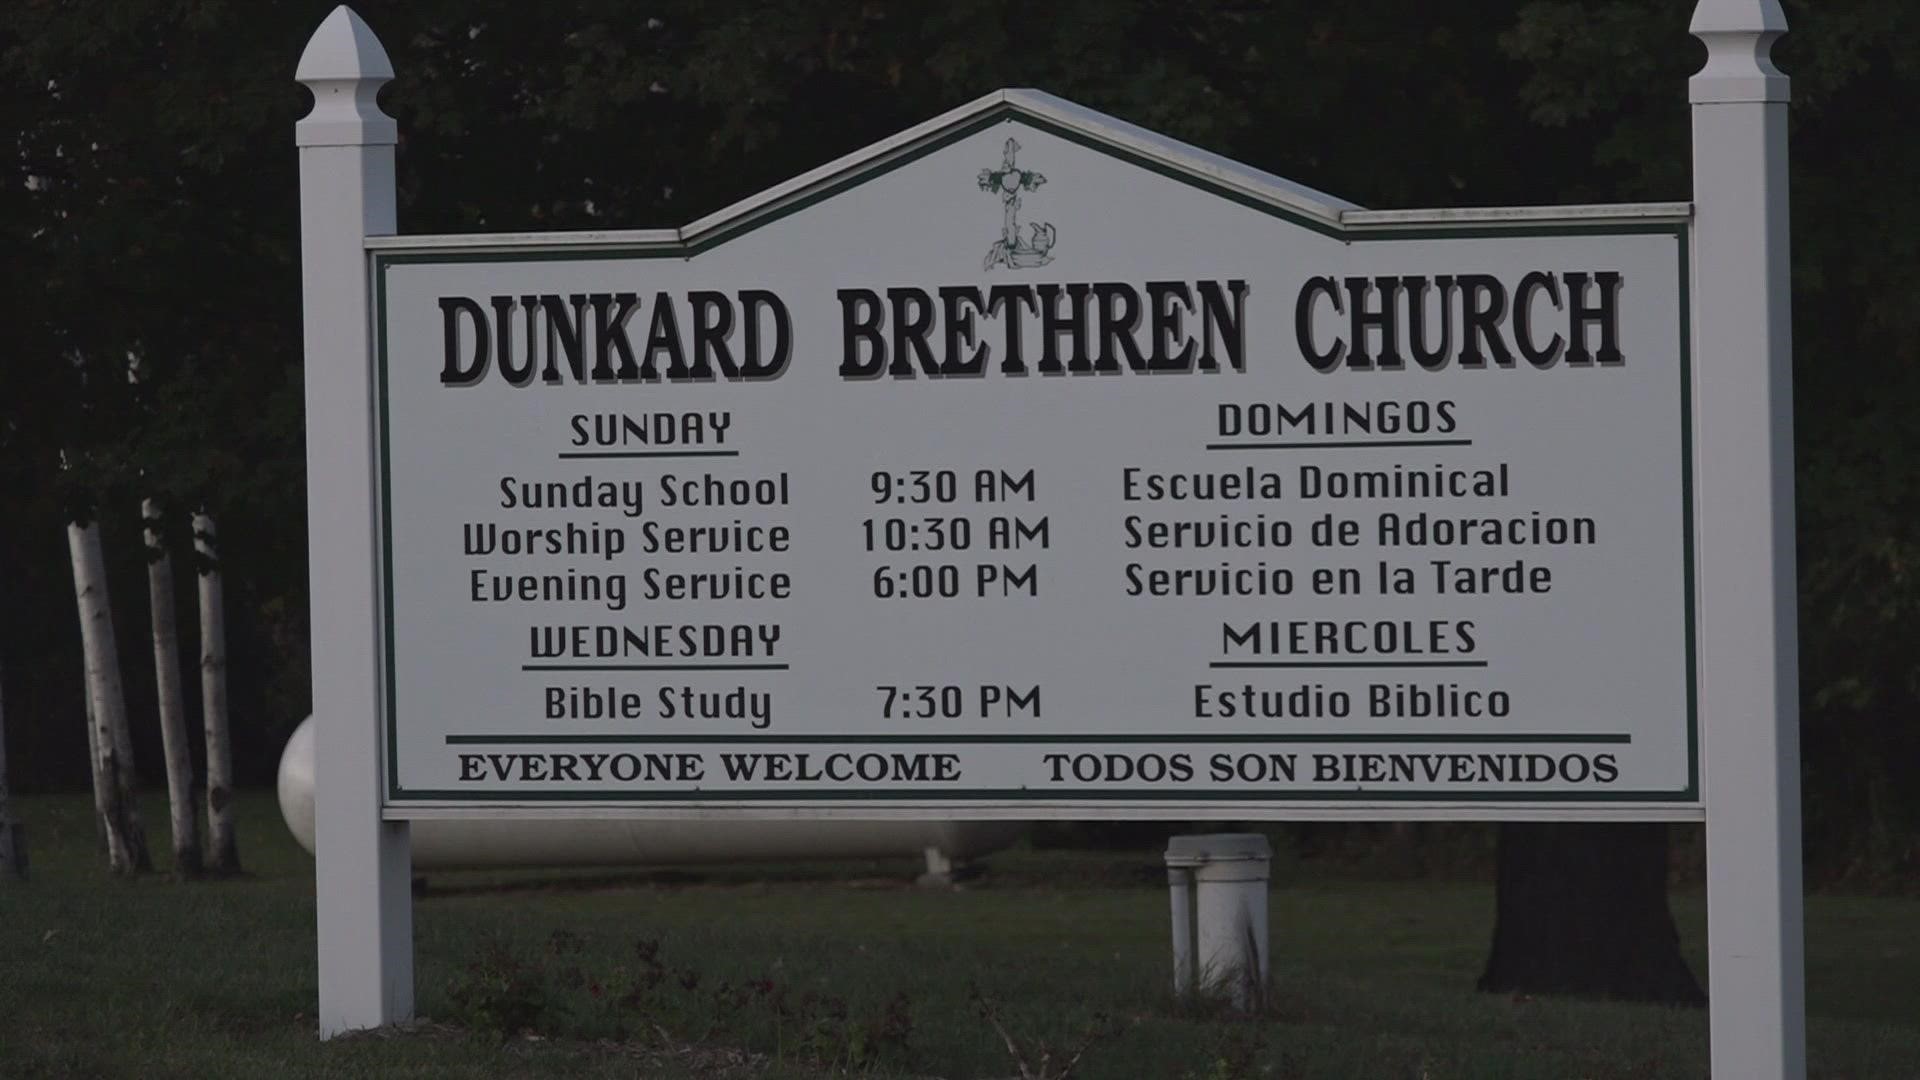 Hart Dunkard Brethren Church's pastor, Ron Marks, is quoted as saying the missionaries are a family, one adult and four children.